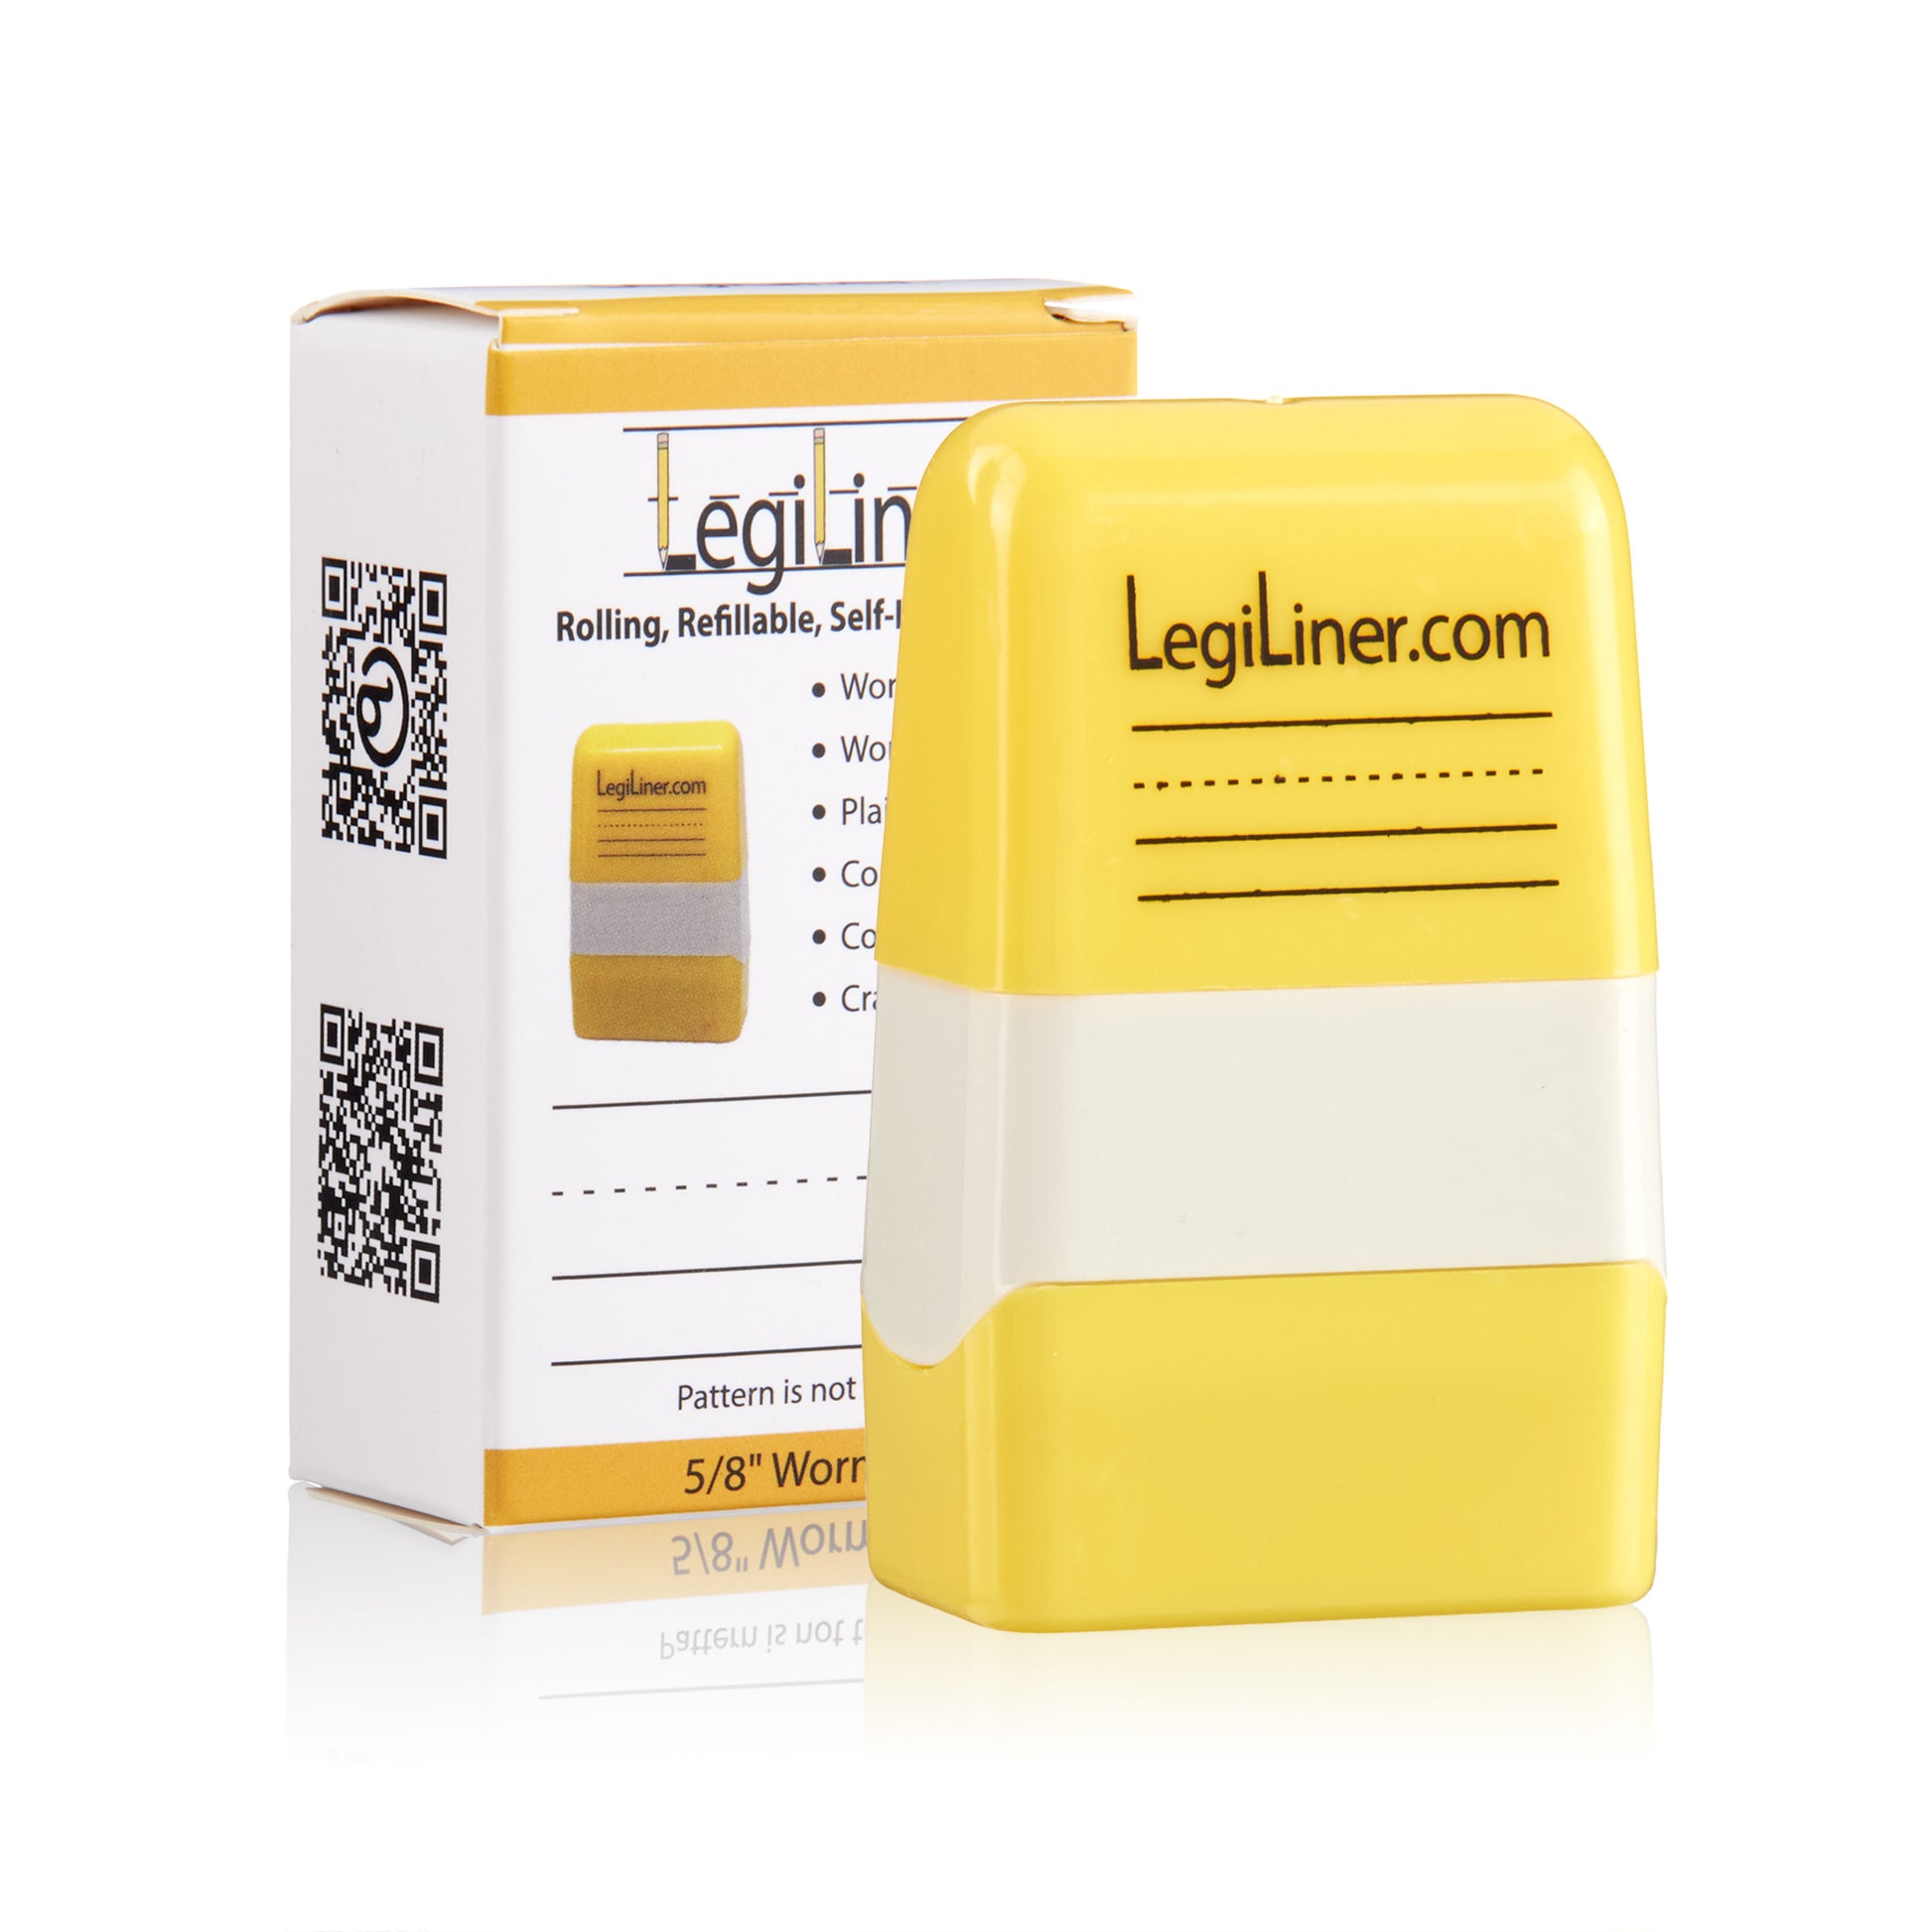 LegiLiner Perfect Pair of 2 with A Free Ink Refill